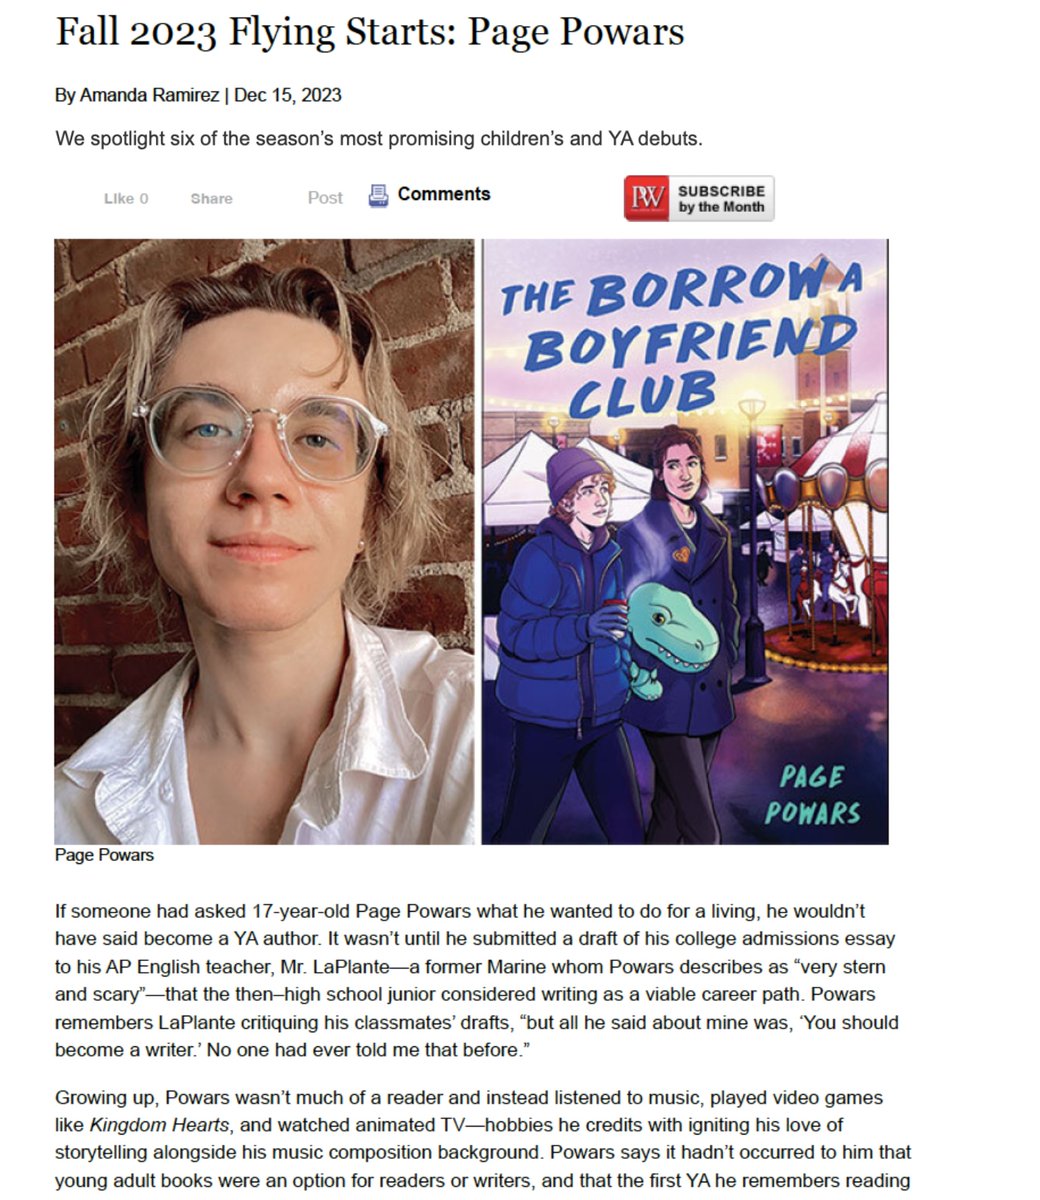 THANK YOU @PublishersWkly FOR NAMING ME AS ONE OF THE MOST PROMISING YA/CHILDRENS DEBUTS!!!! AAAAAAA